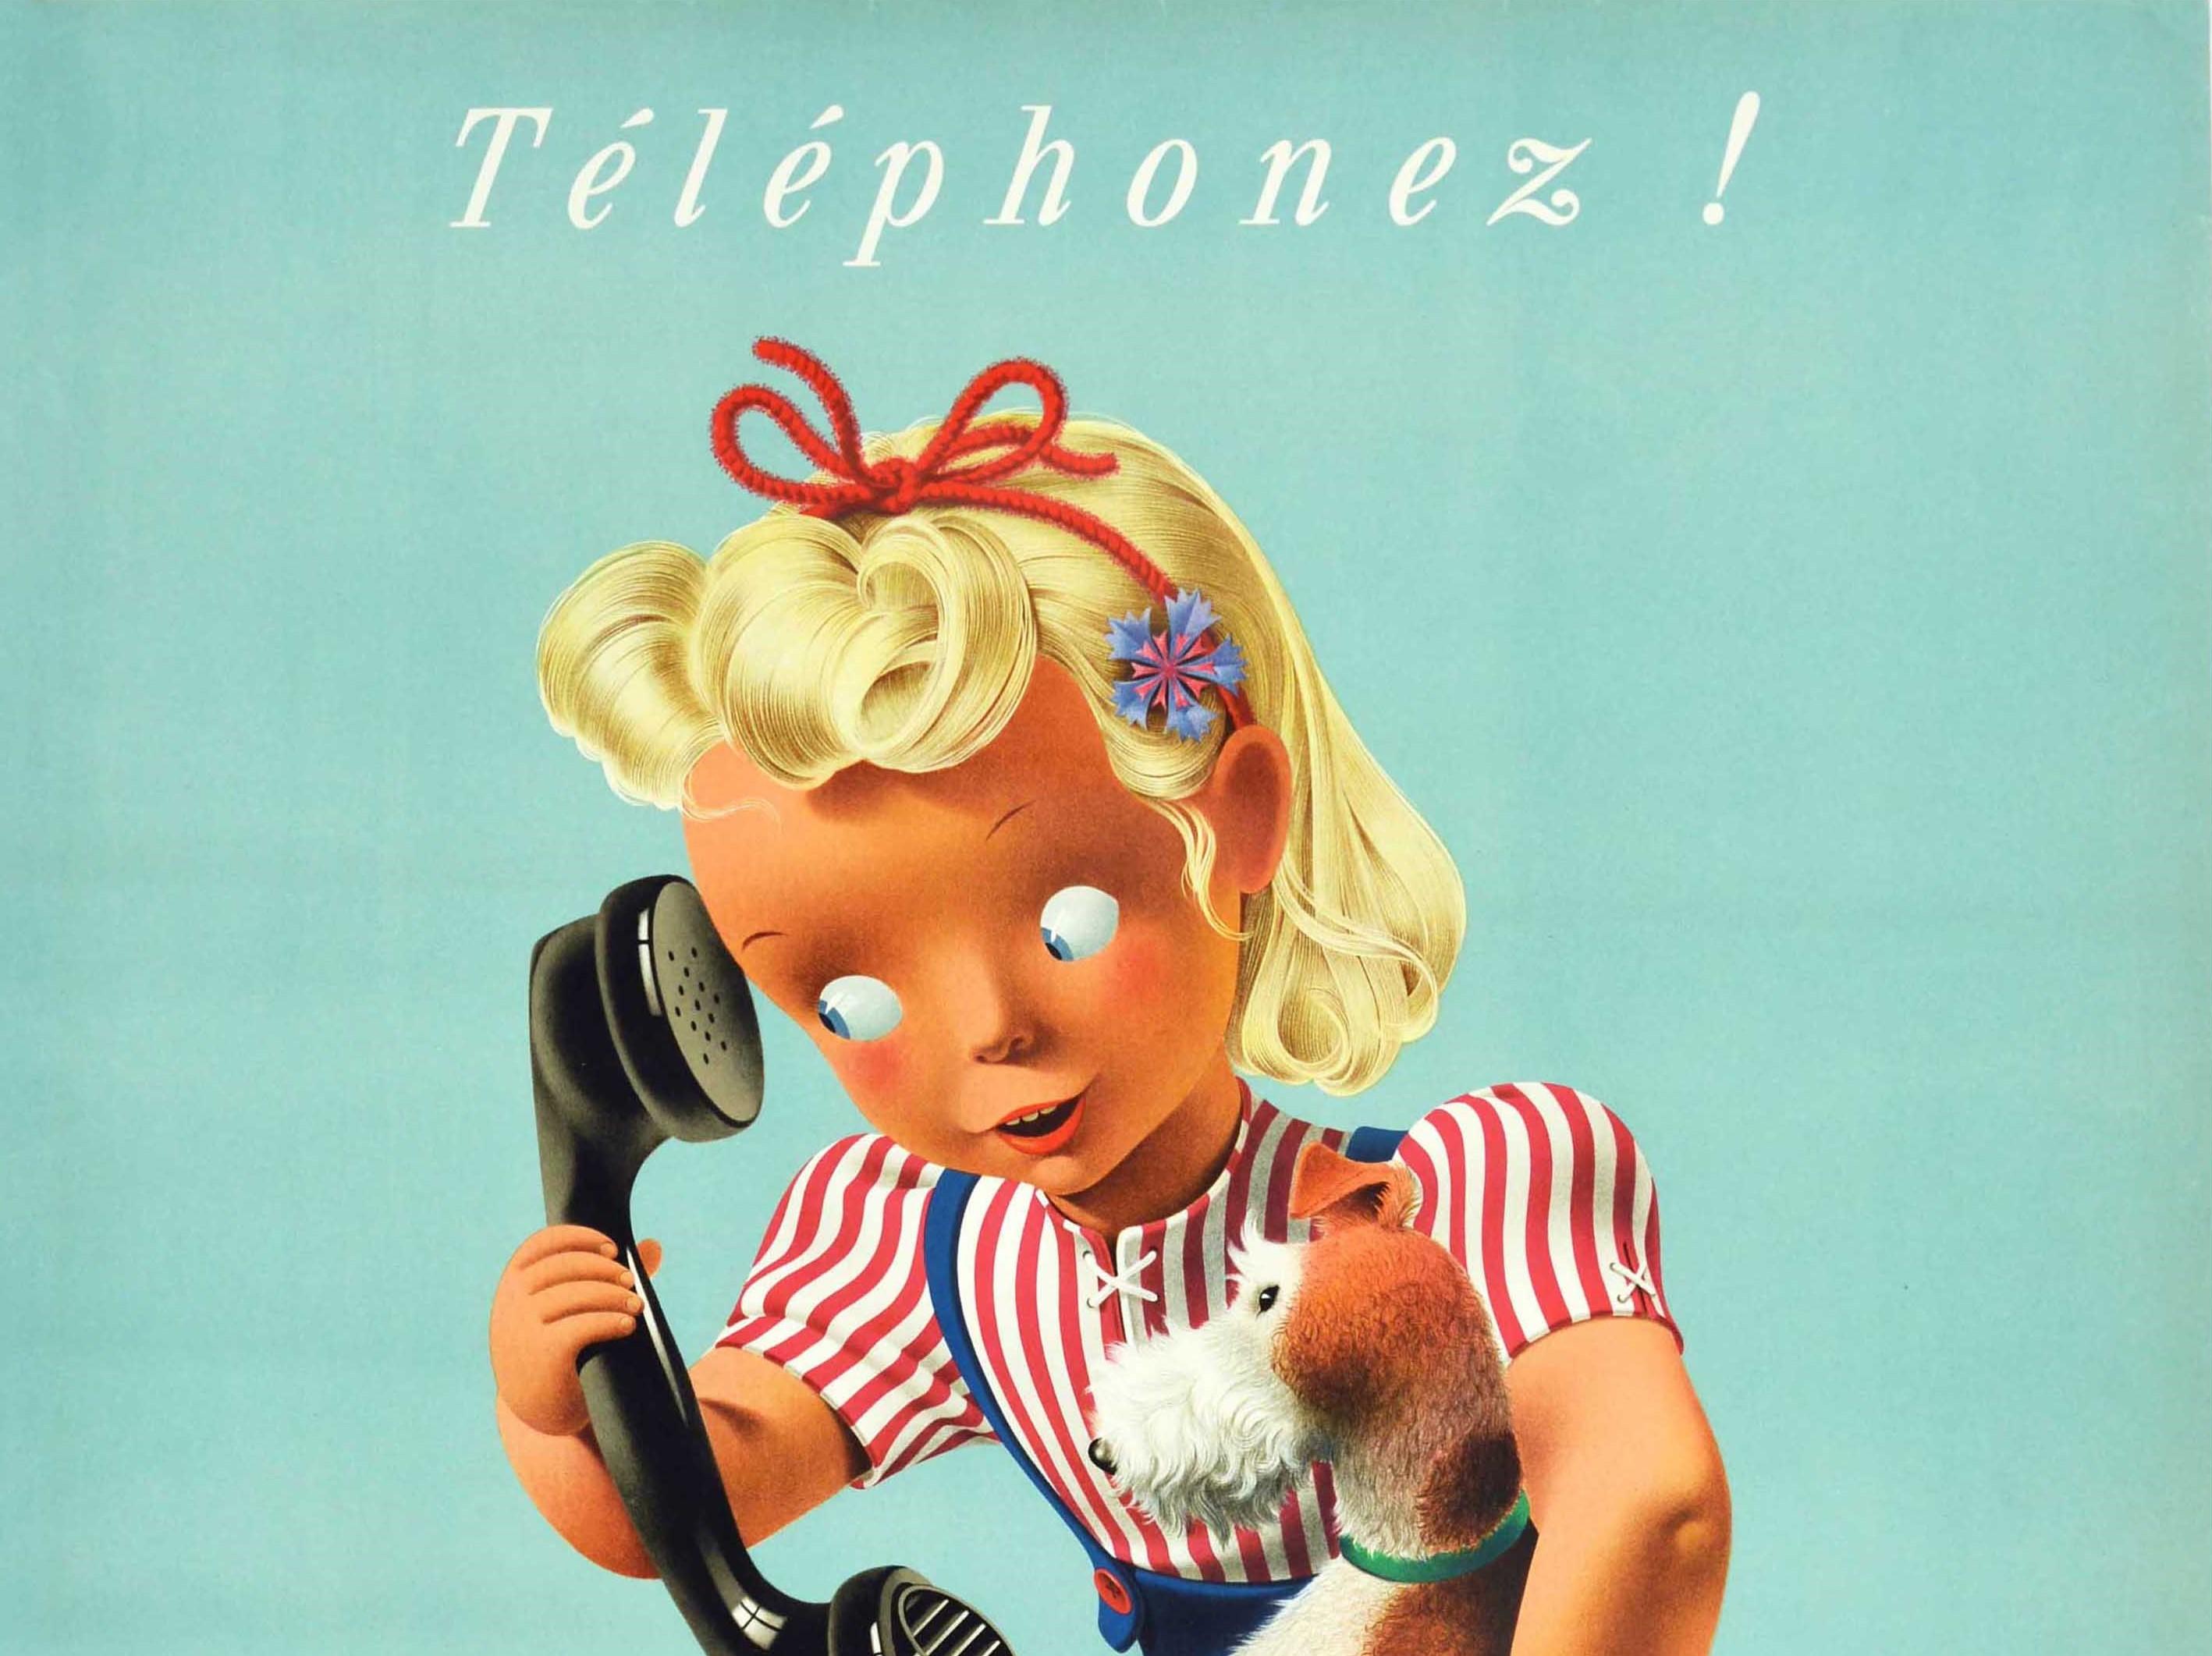 Original vintage advertising poster for Swiss Telecom - Telephonez! - featuring an adorable illustration by Donald Brun (1909-1999) depicting a young girl in a red and white striped shirt and blue dungarees with red string and a flower in her hair,